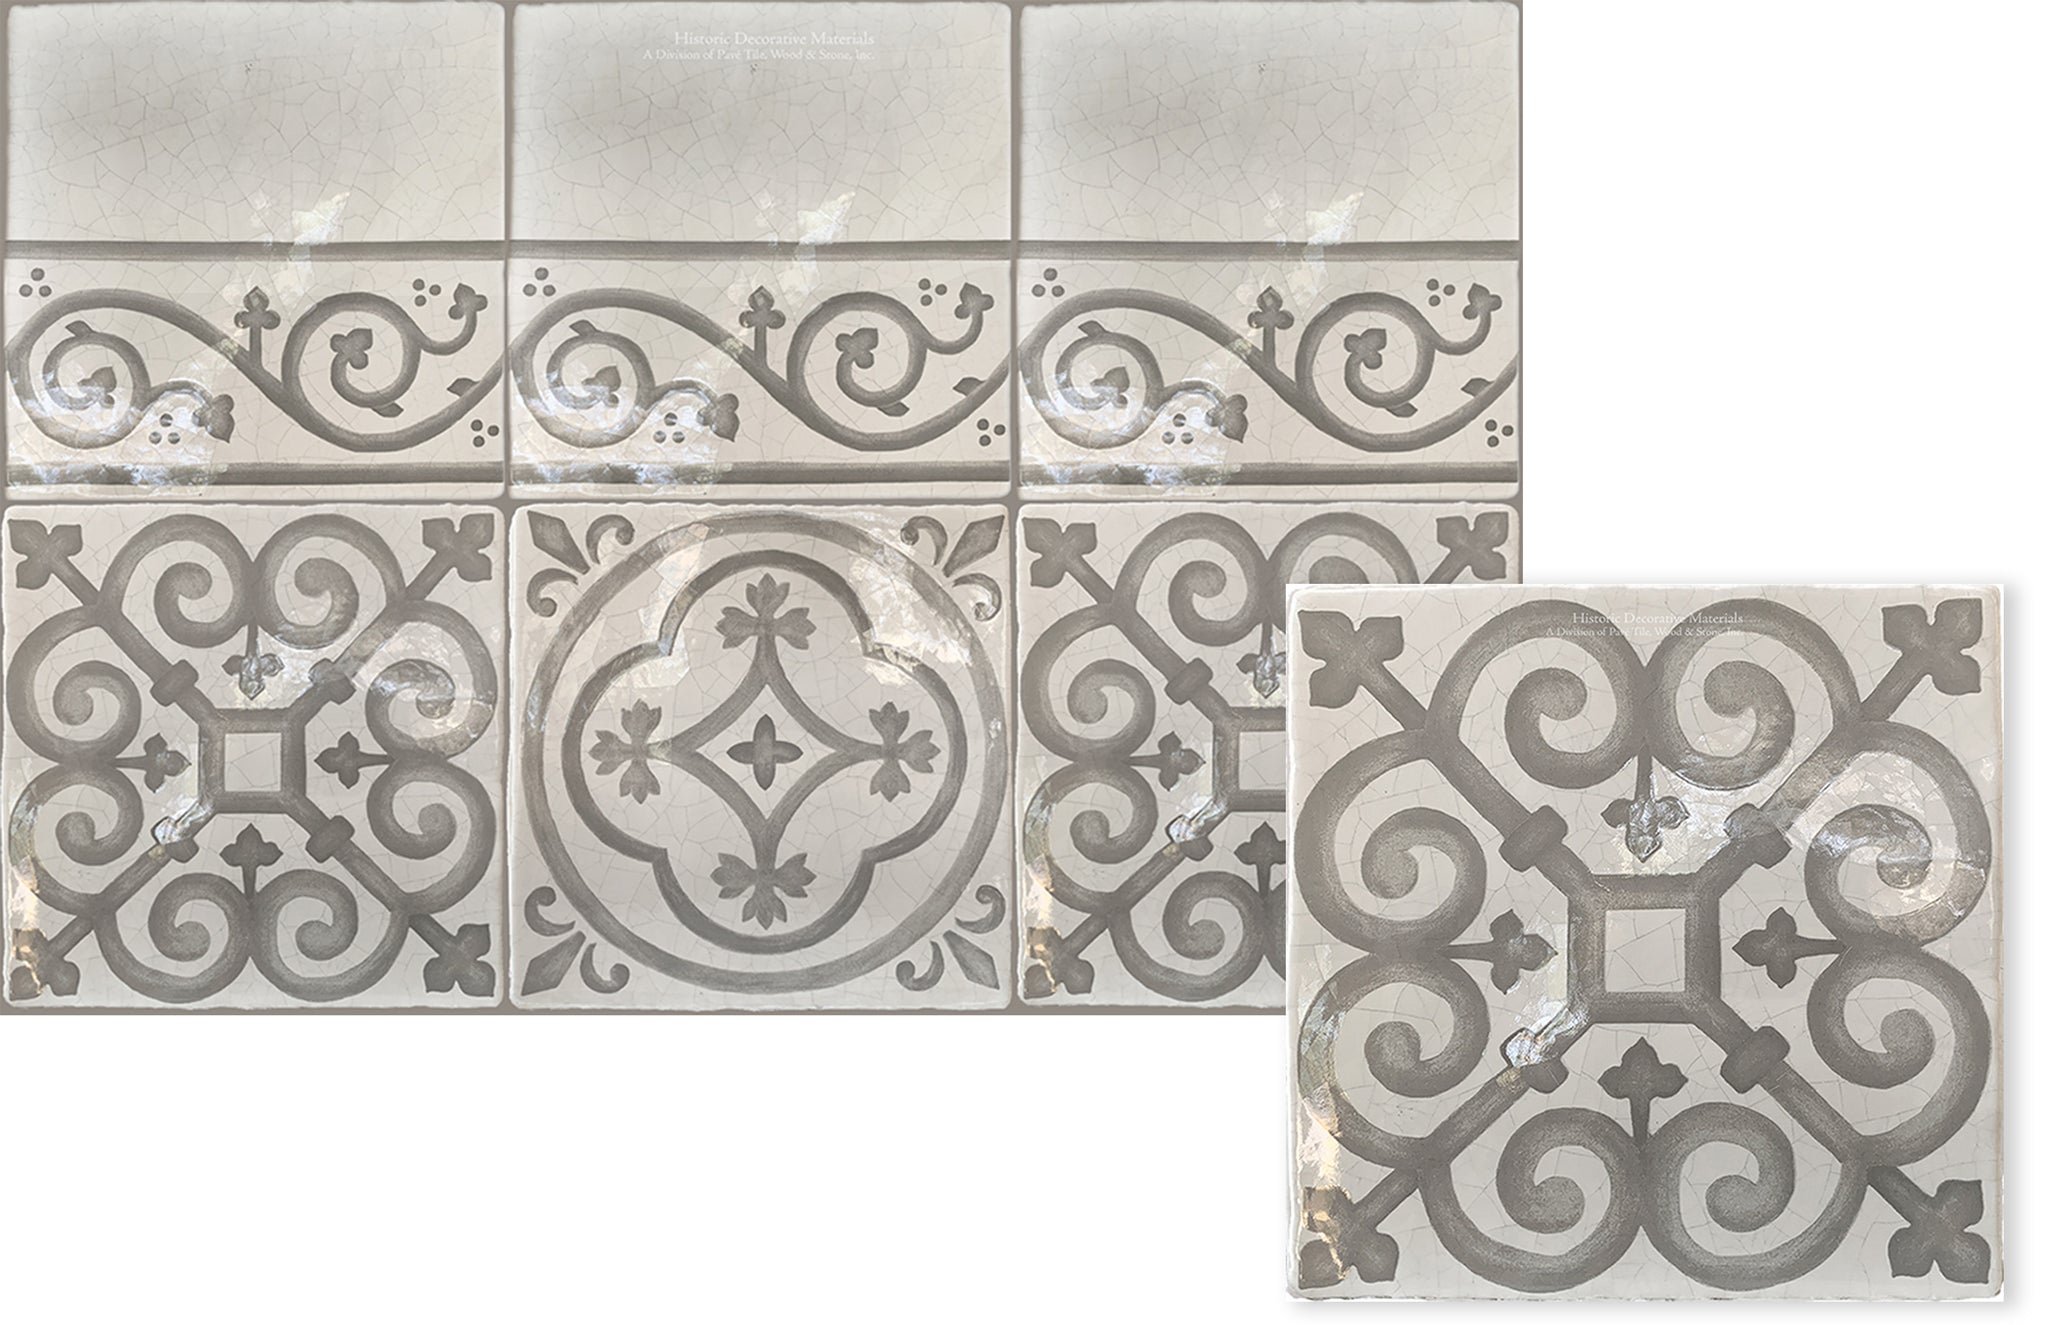 Historic Decorative hand painted wall tiles that are pattern wall tiles for kitchen backsplash, bathroom wall tiles, fireplace surround tiles that interior designers use for luxury, old world and farmhouse interiors